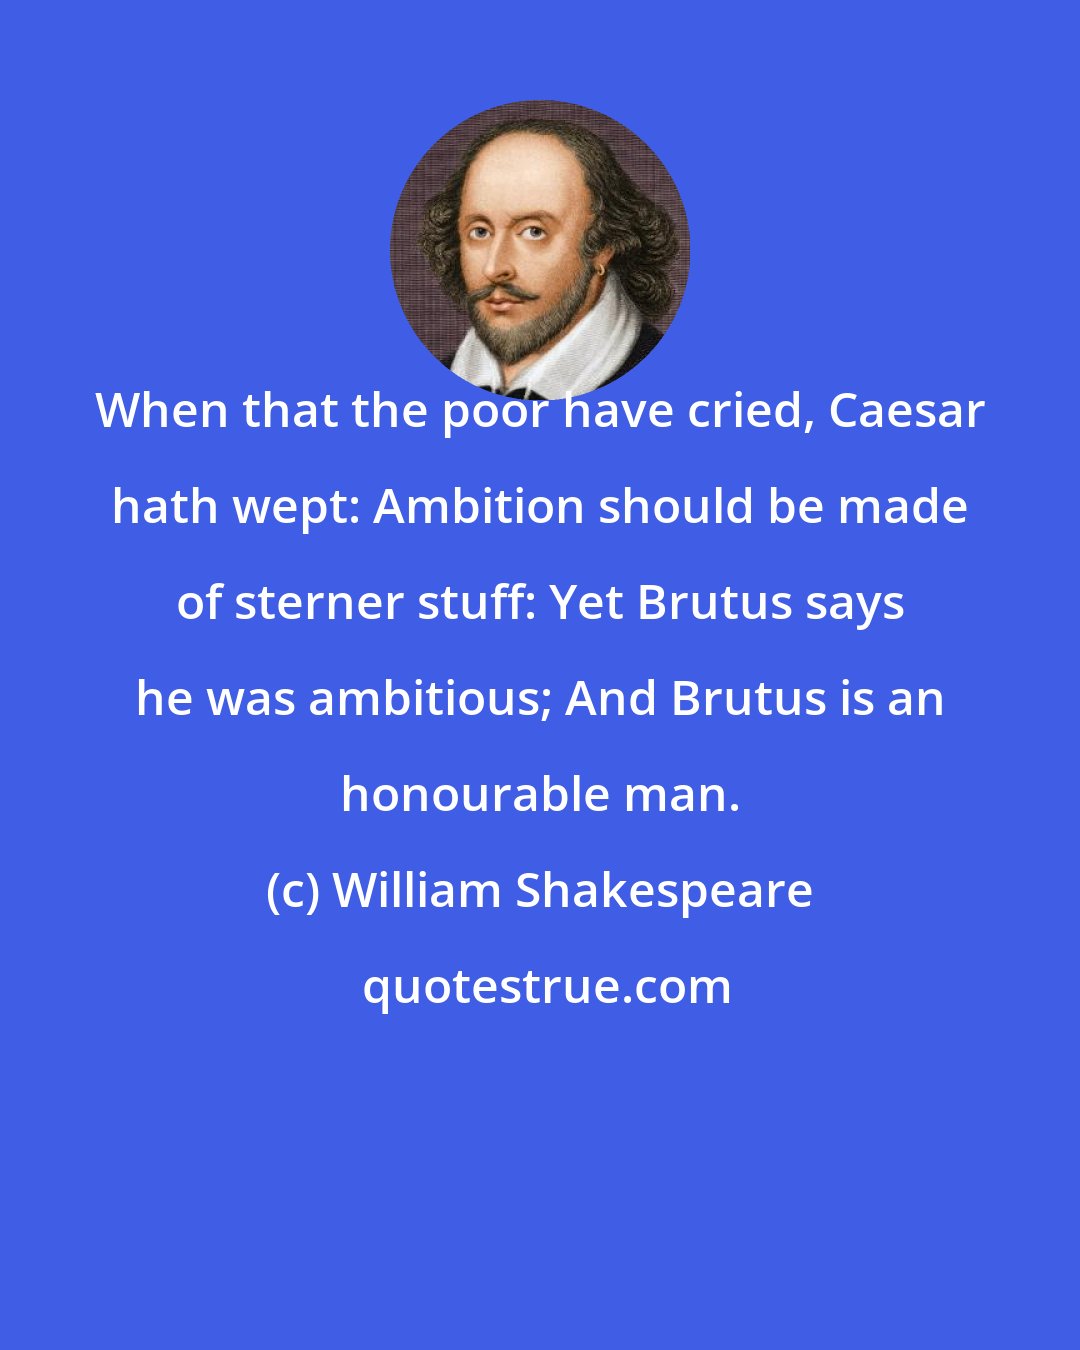 William Shakespeare: When that the poor have cried, Caesar hath wept: Ambition should be made of sterner stuff: Yet Brutus says he was ambitious; And Brutus is an honourable man.